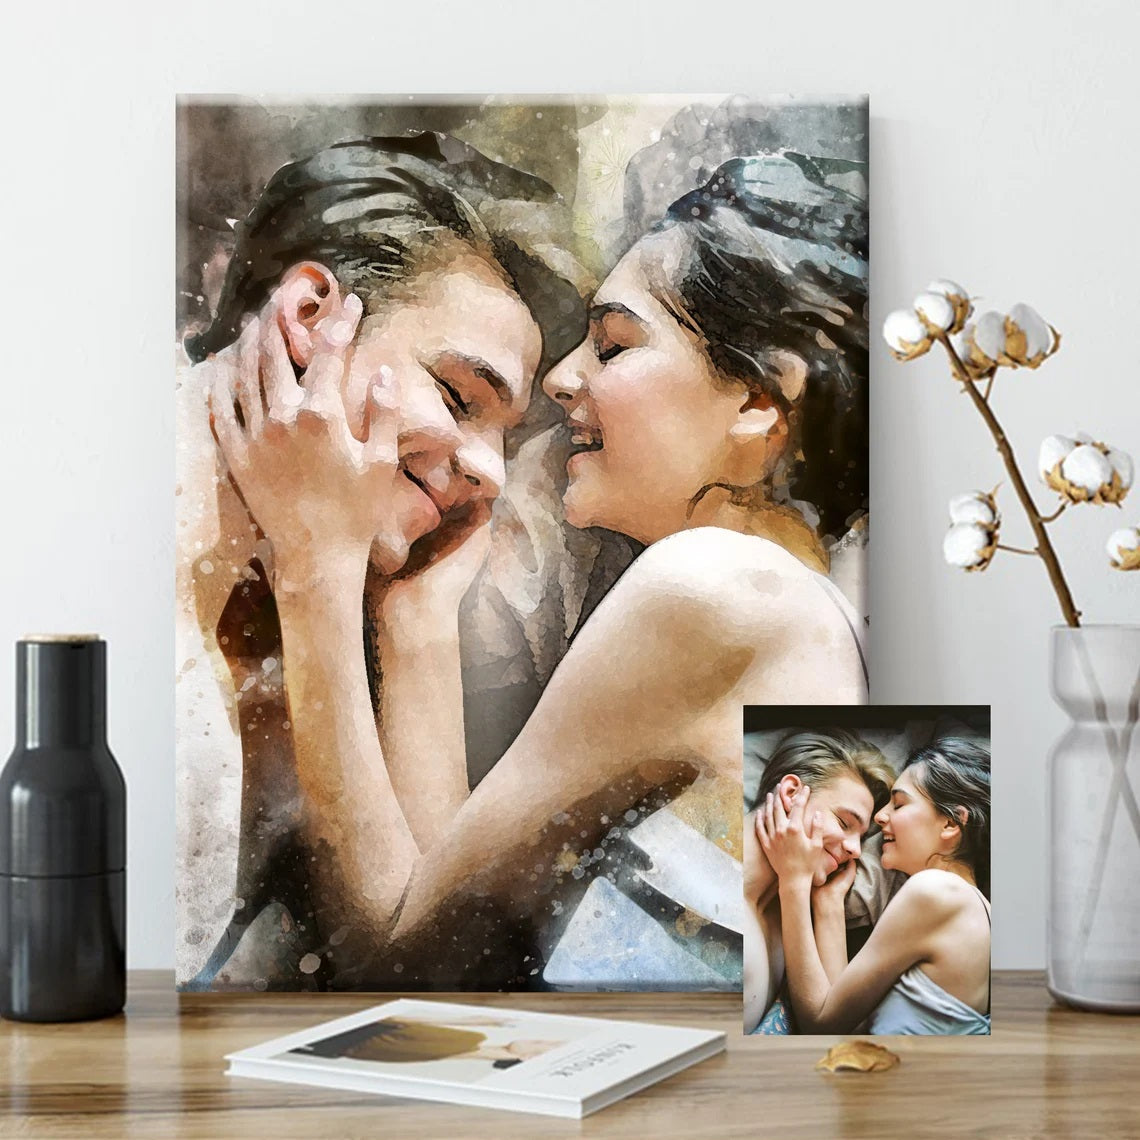 Custom DIY Paint by Numbers Kit (16"x20") Oil Painting Portrait From Photo on Canvas